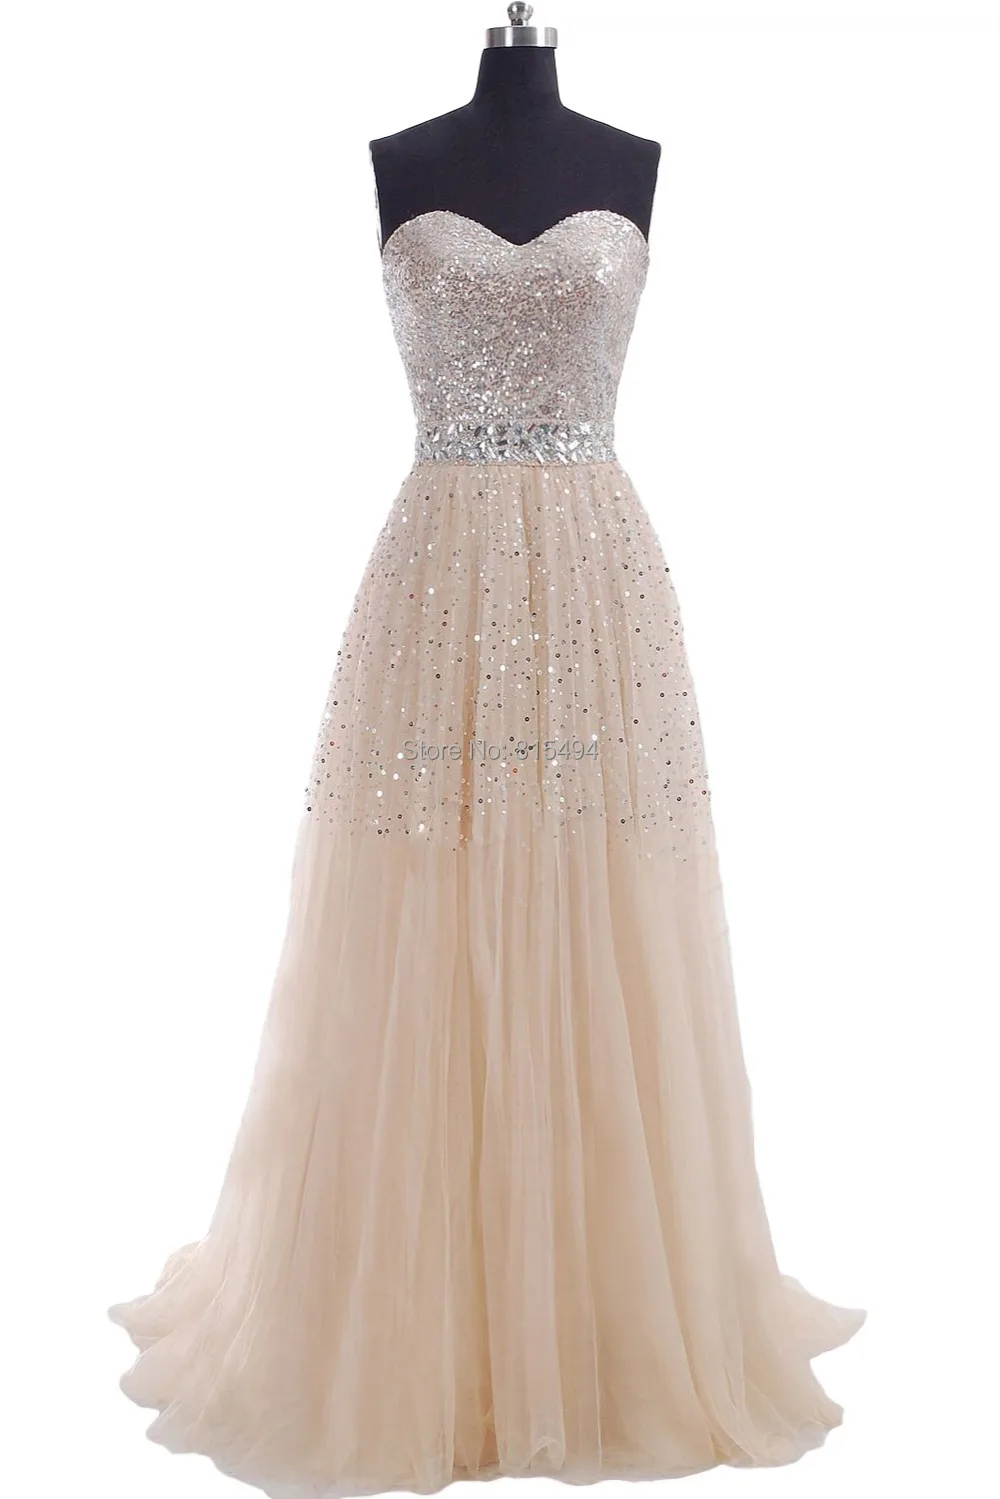 2019 Sweetheart a line champagne Formal  prom  Dress  long 